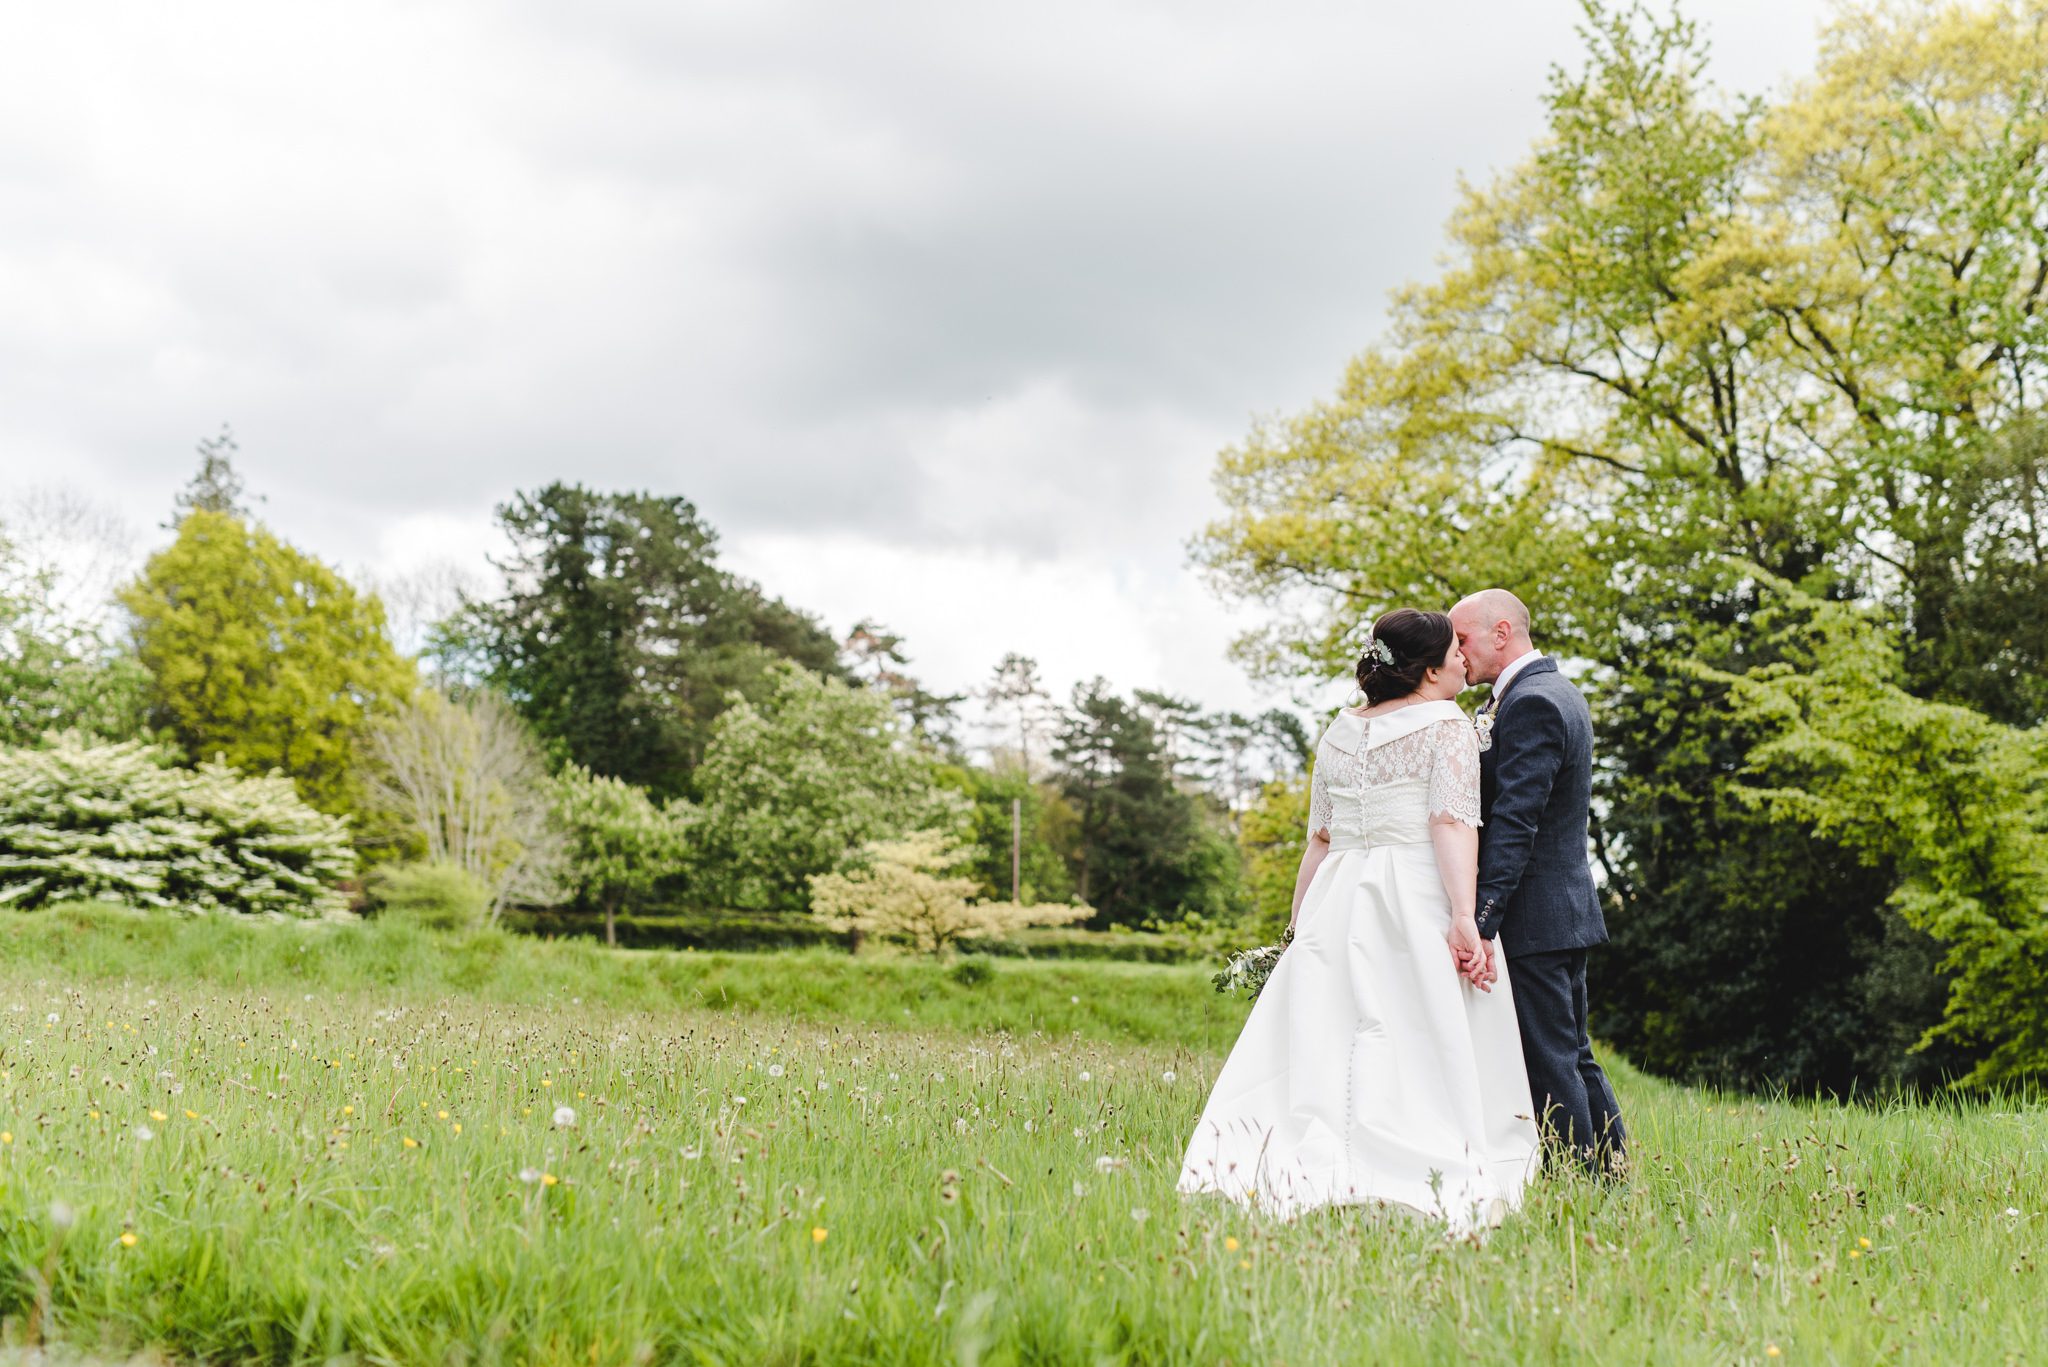 A couple on their wedding day at Plas Dinam being photographed by Bigeye Photography